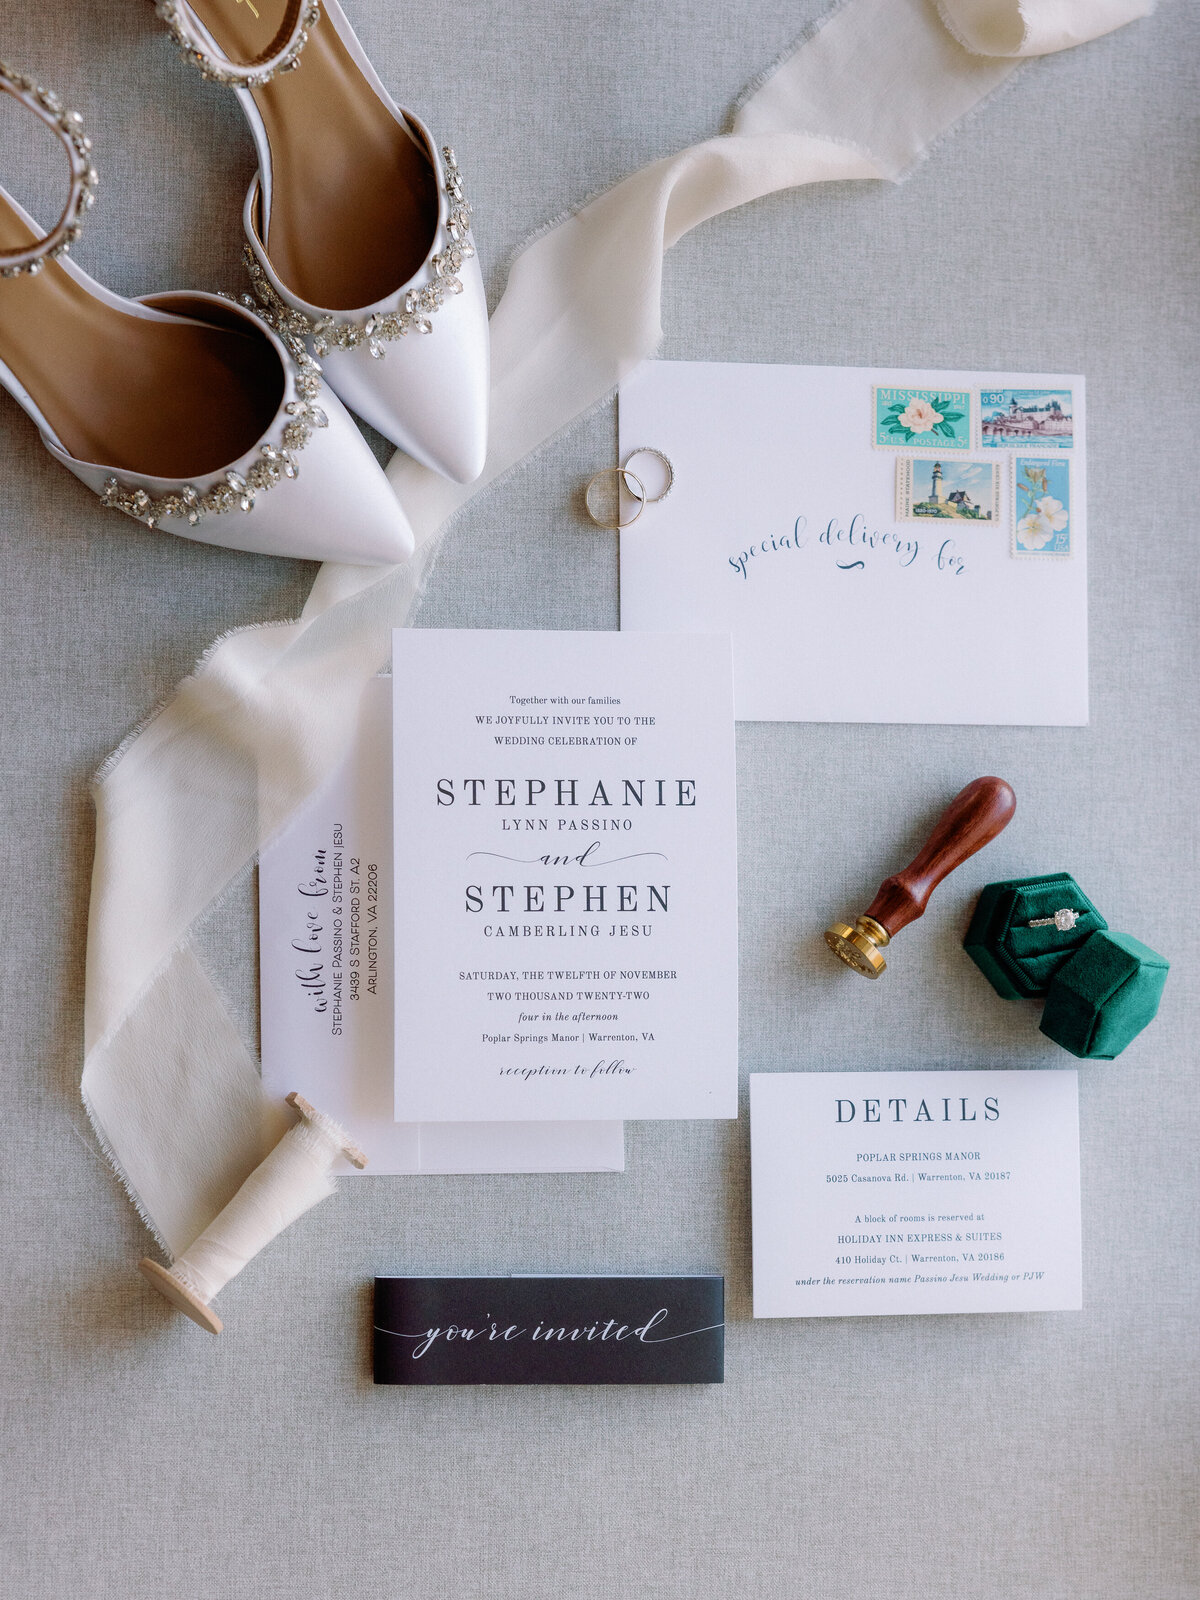 A top down view of the wedding details including the wedding invitation, the wedding rings, and the bride's shoes